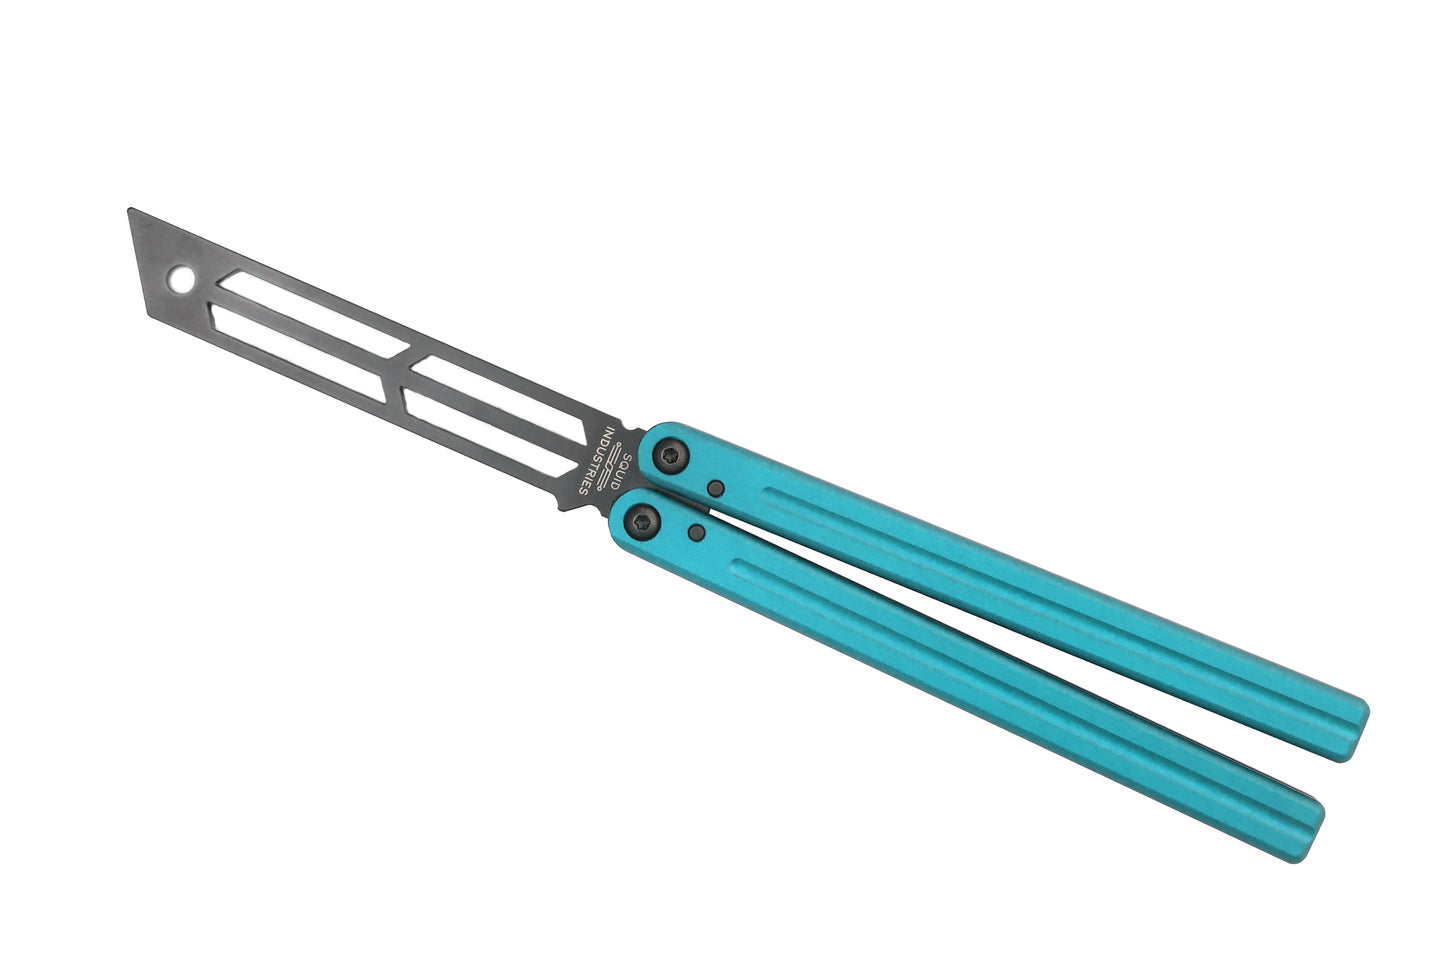 ISO Teal Triton_1 butterfly knife trainer balisong durable 